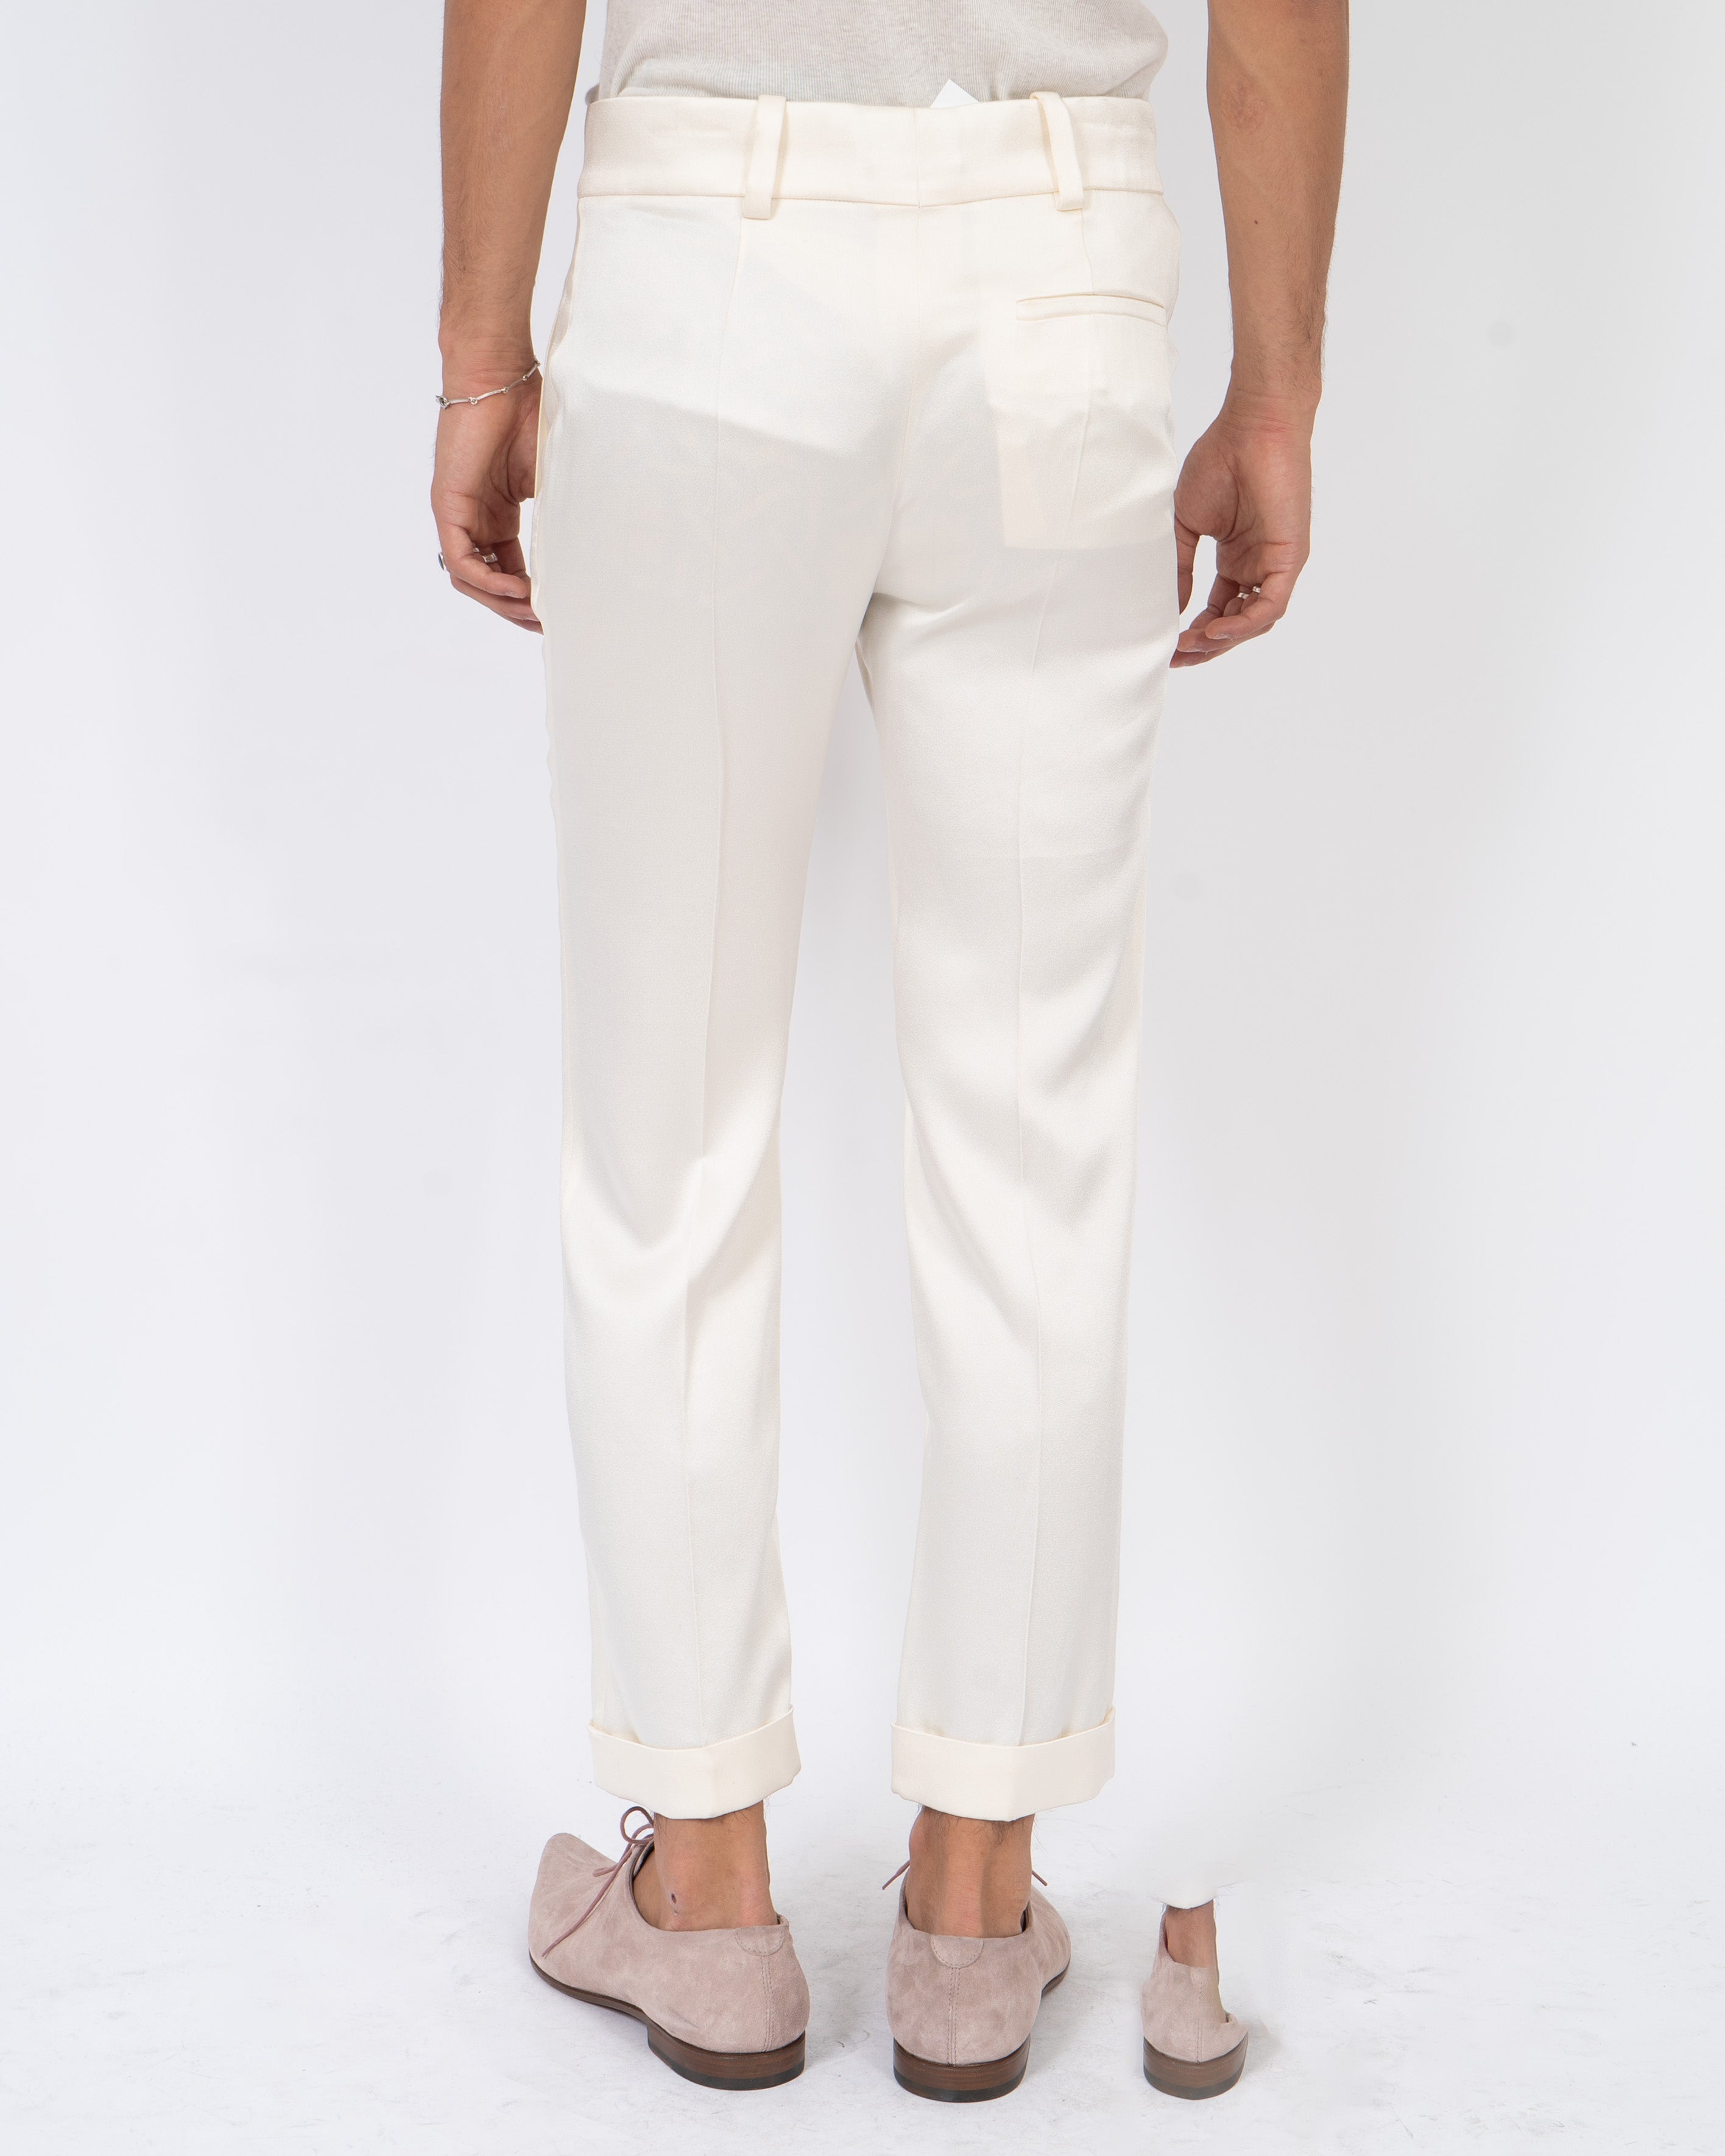 SS19 Cream White Crepe Trousers 1 of 1 Sample